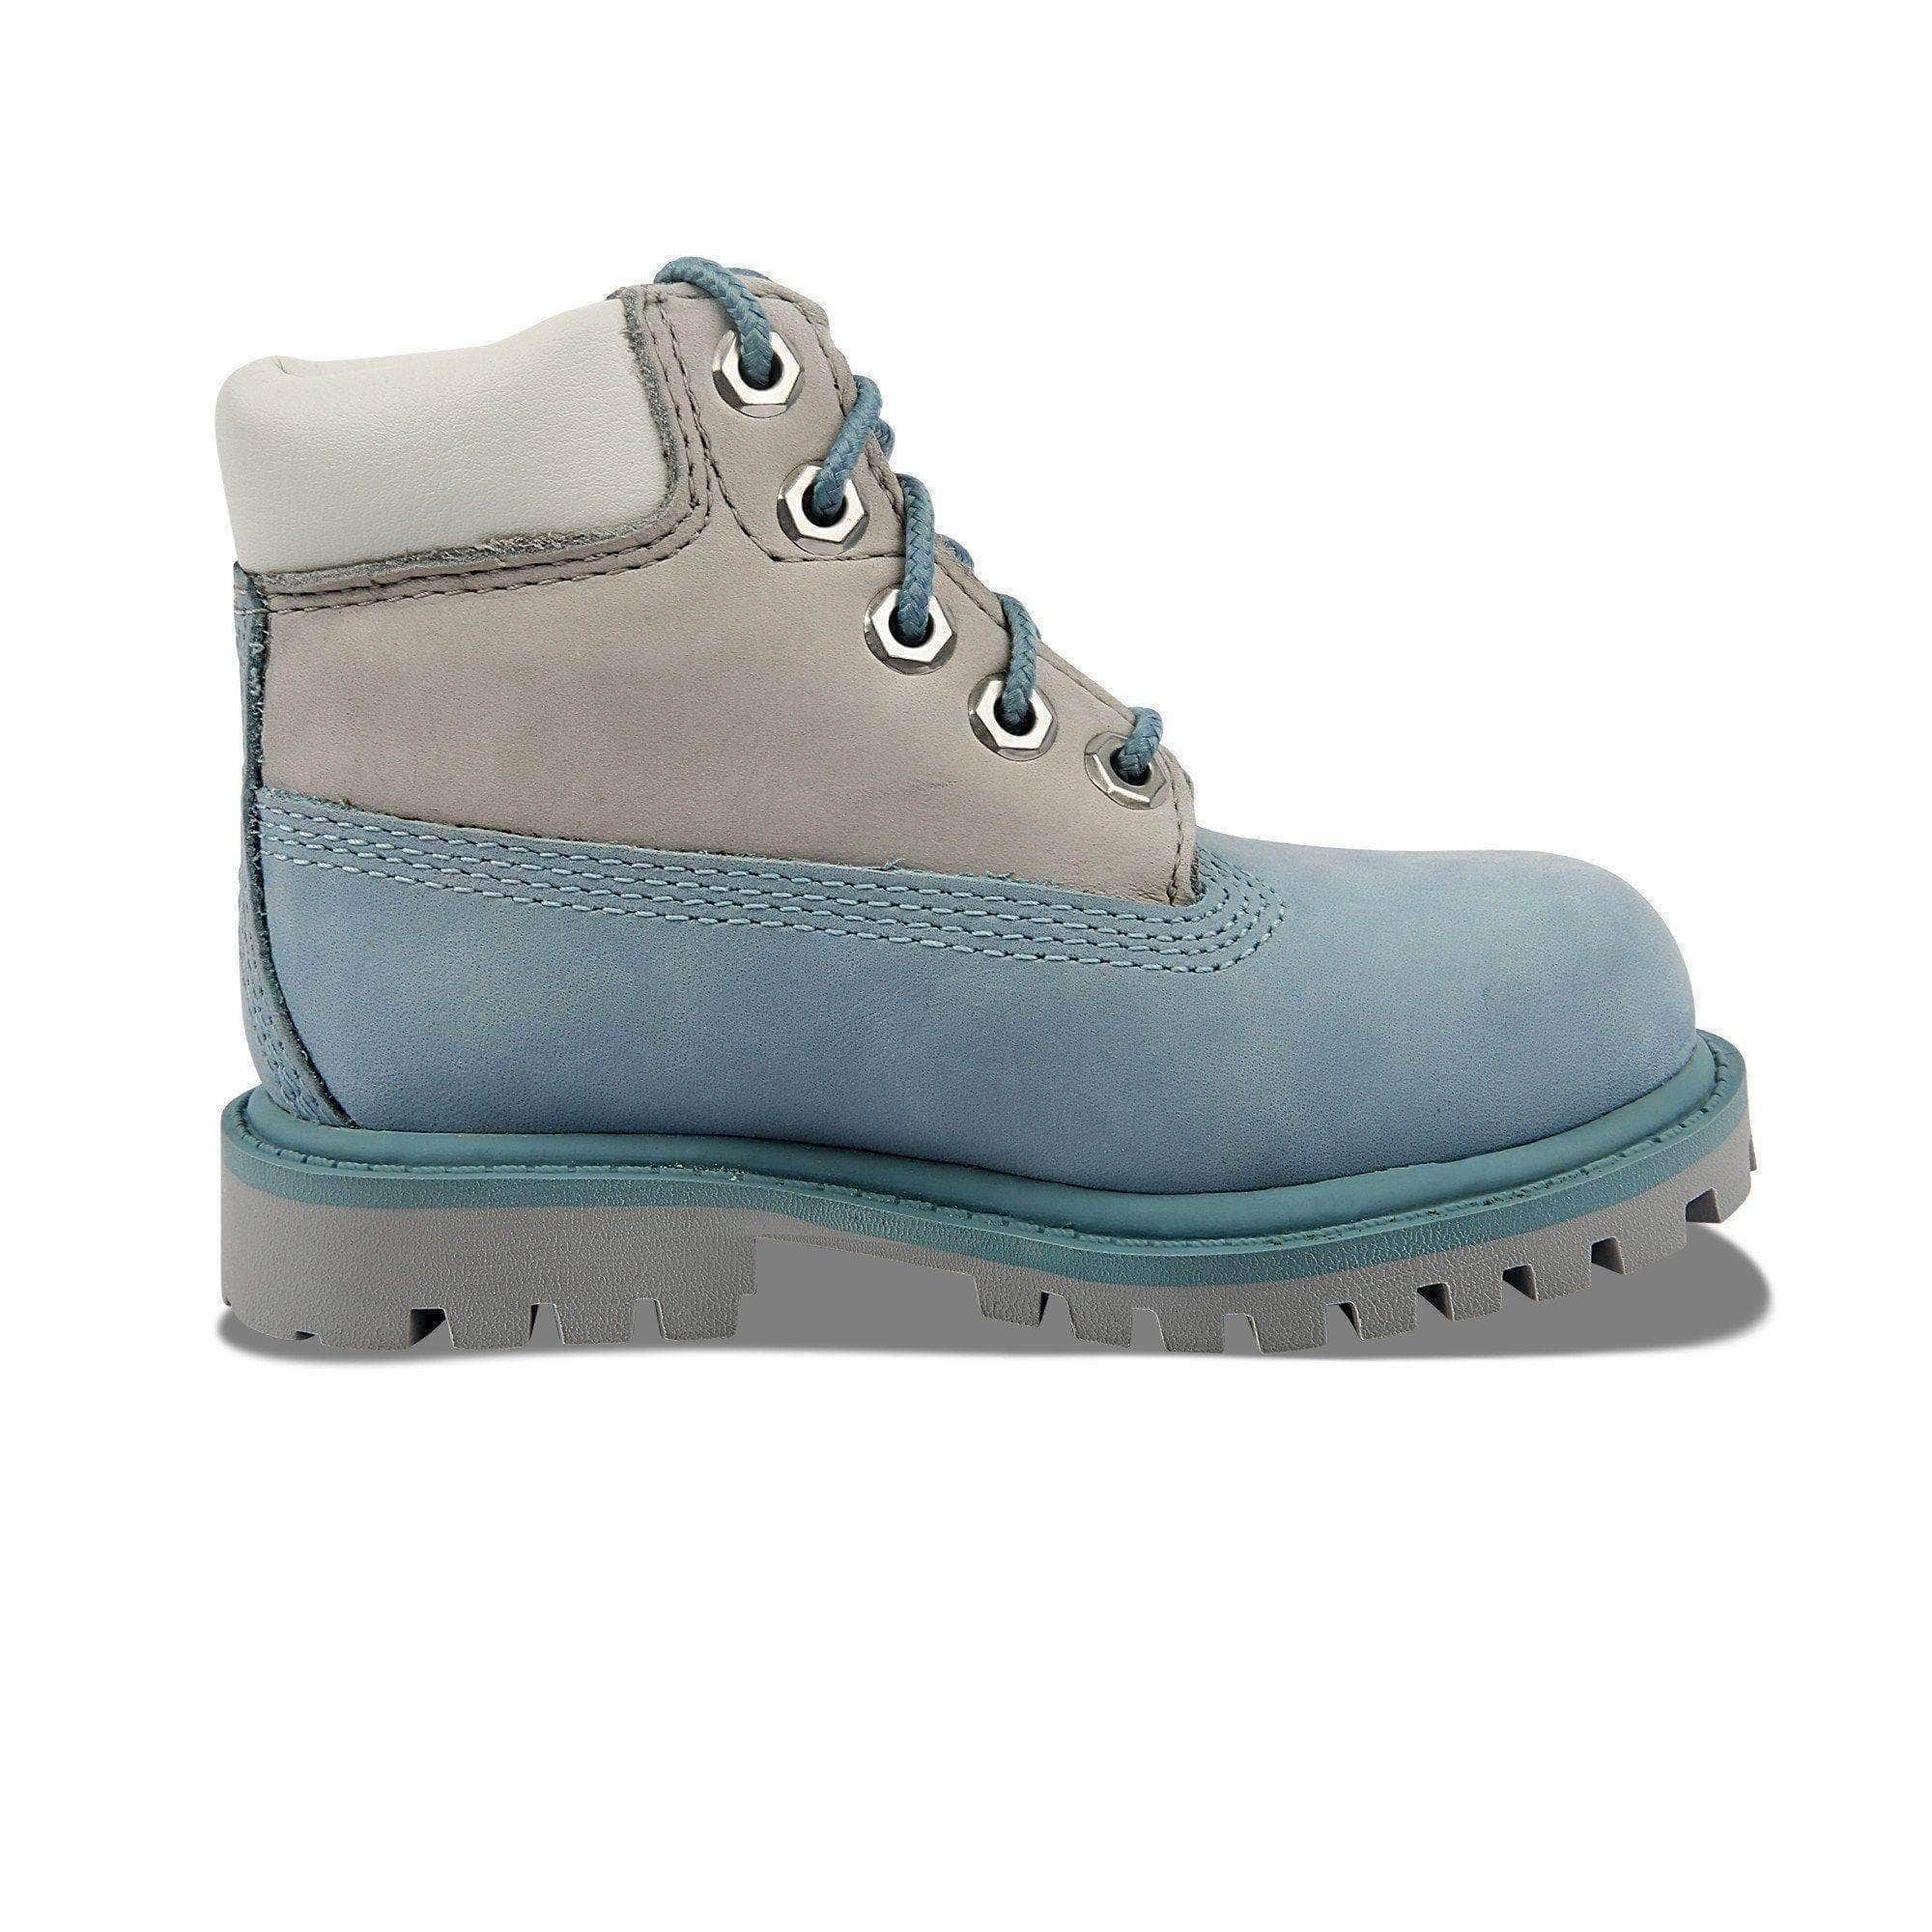 Timberland 6 Inch Premium Waterproof Boots - Toddlers